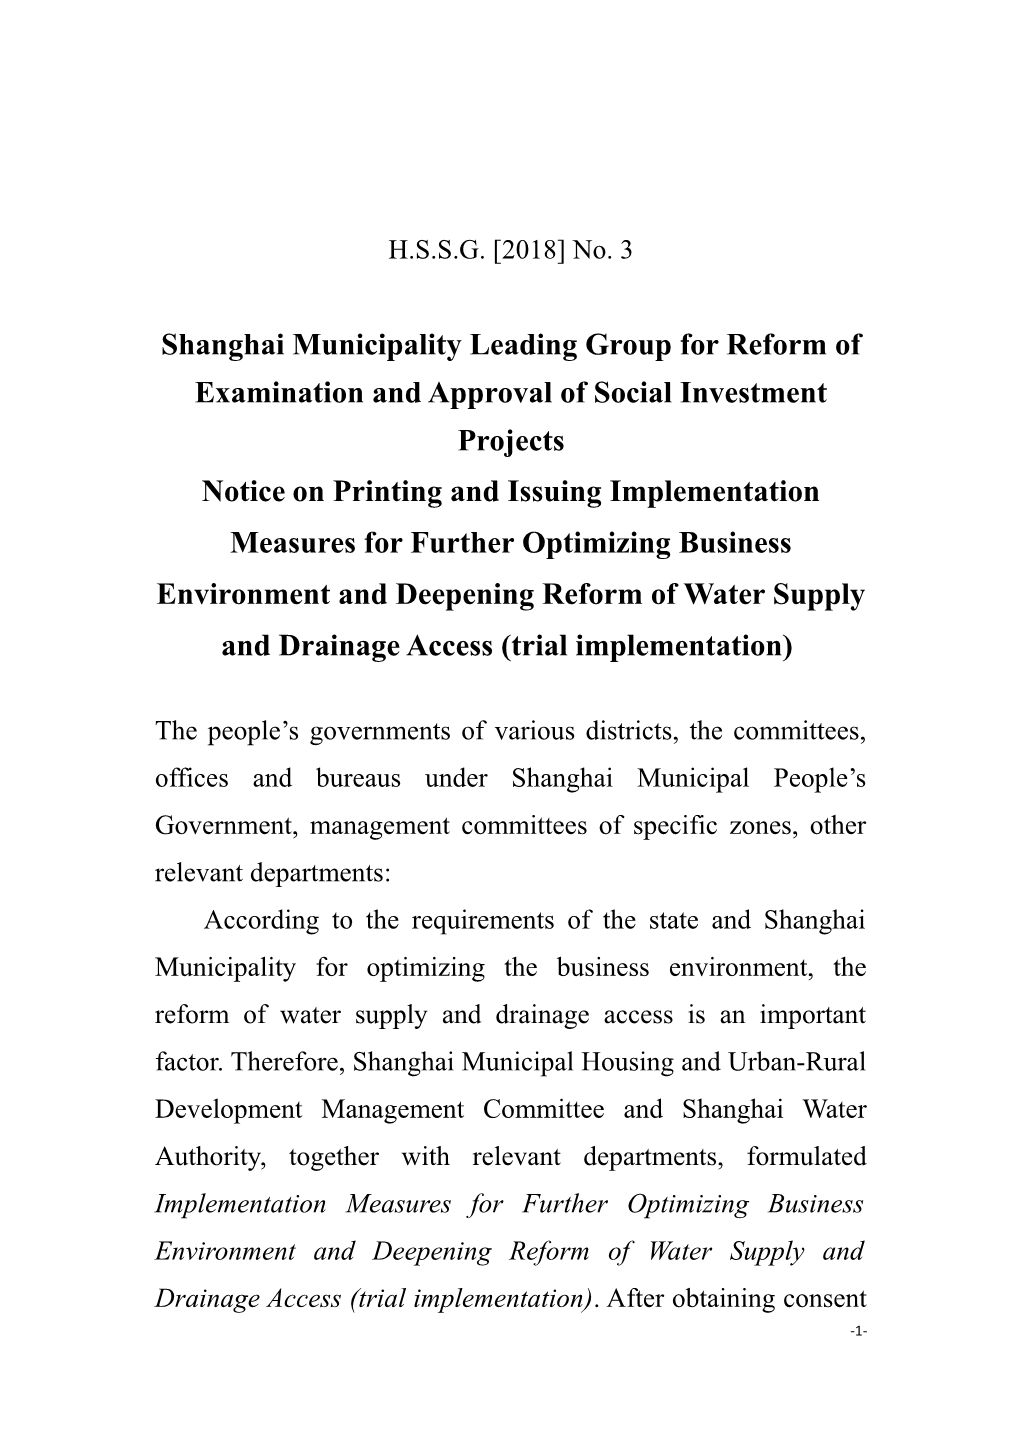 Shanghai Municipality Leading Group for Reform of Examination and Approval of Social Investment